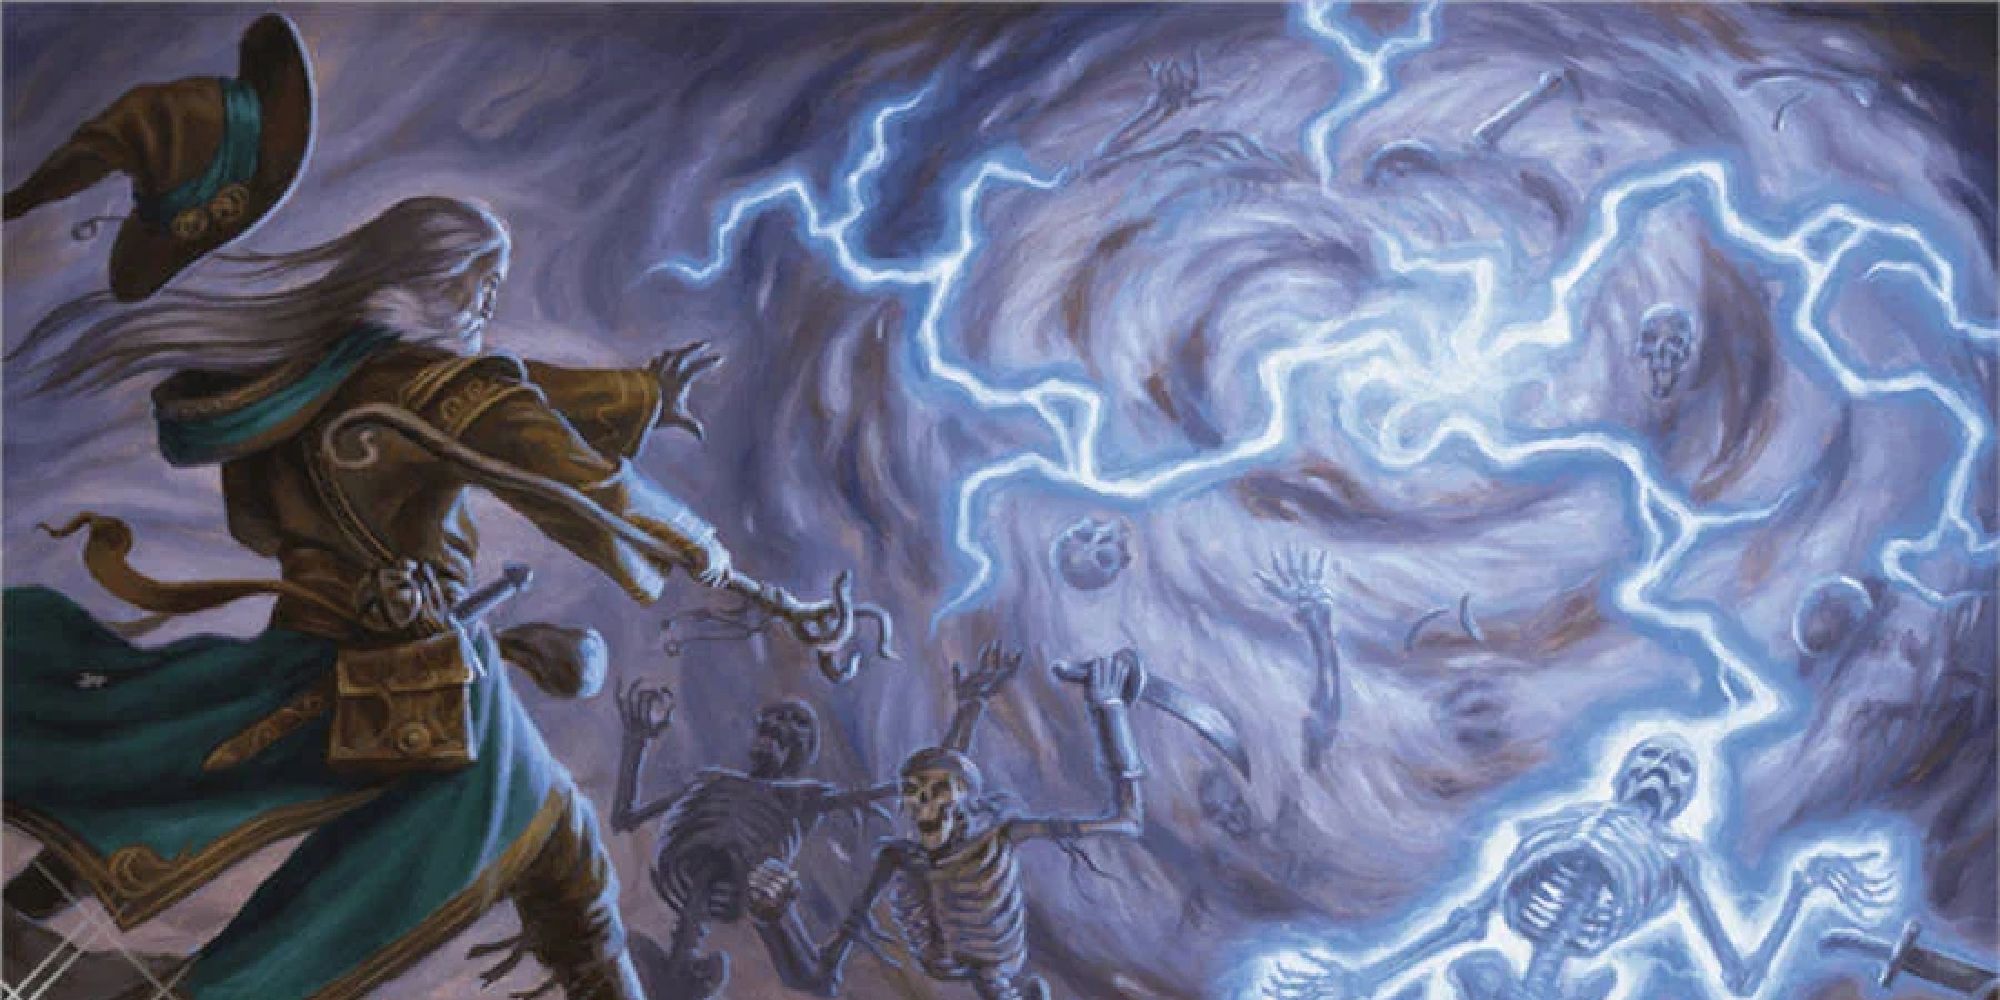 A grey-haired wizard casts a lightening spell from a swirling vortex against an army of skeletons.